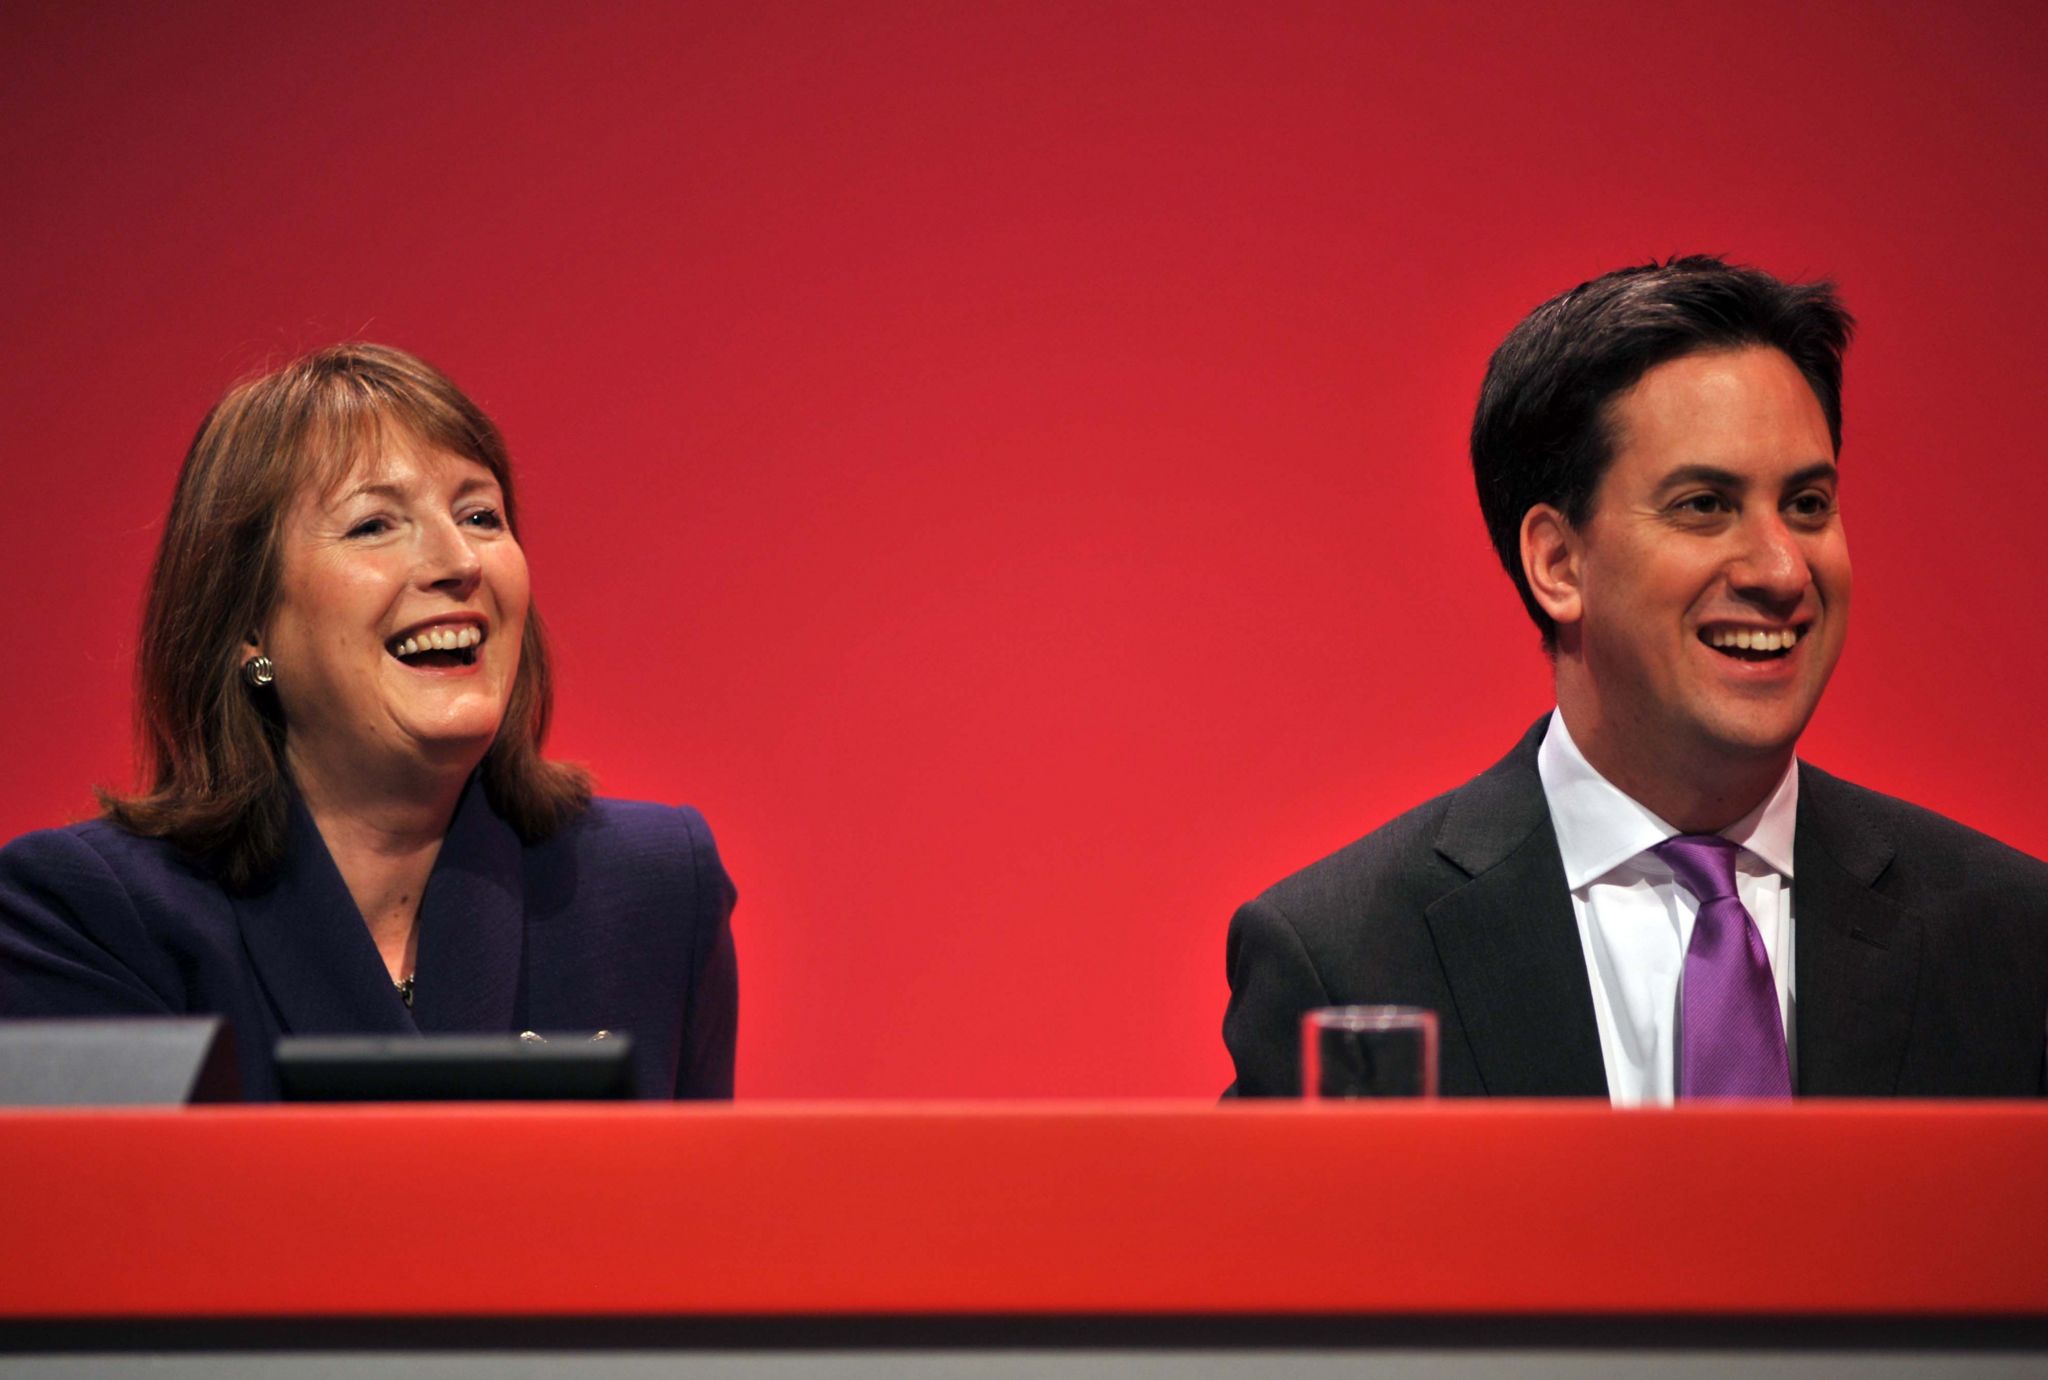 Harriet Harman next to Ed Miliband in 2010